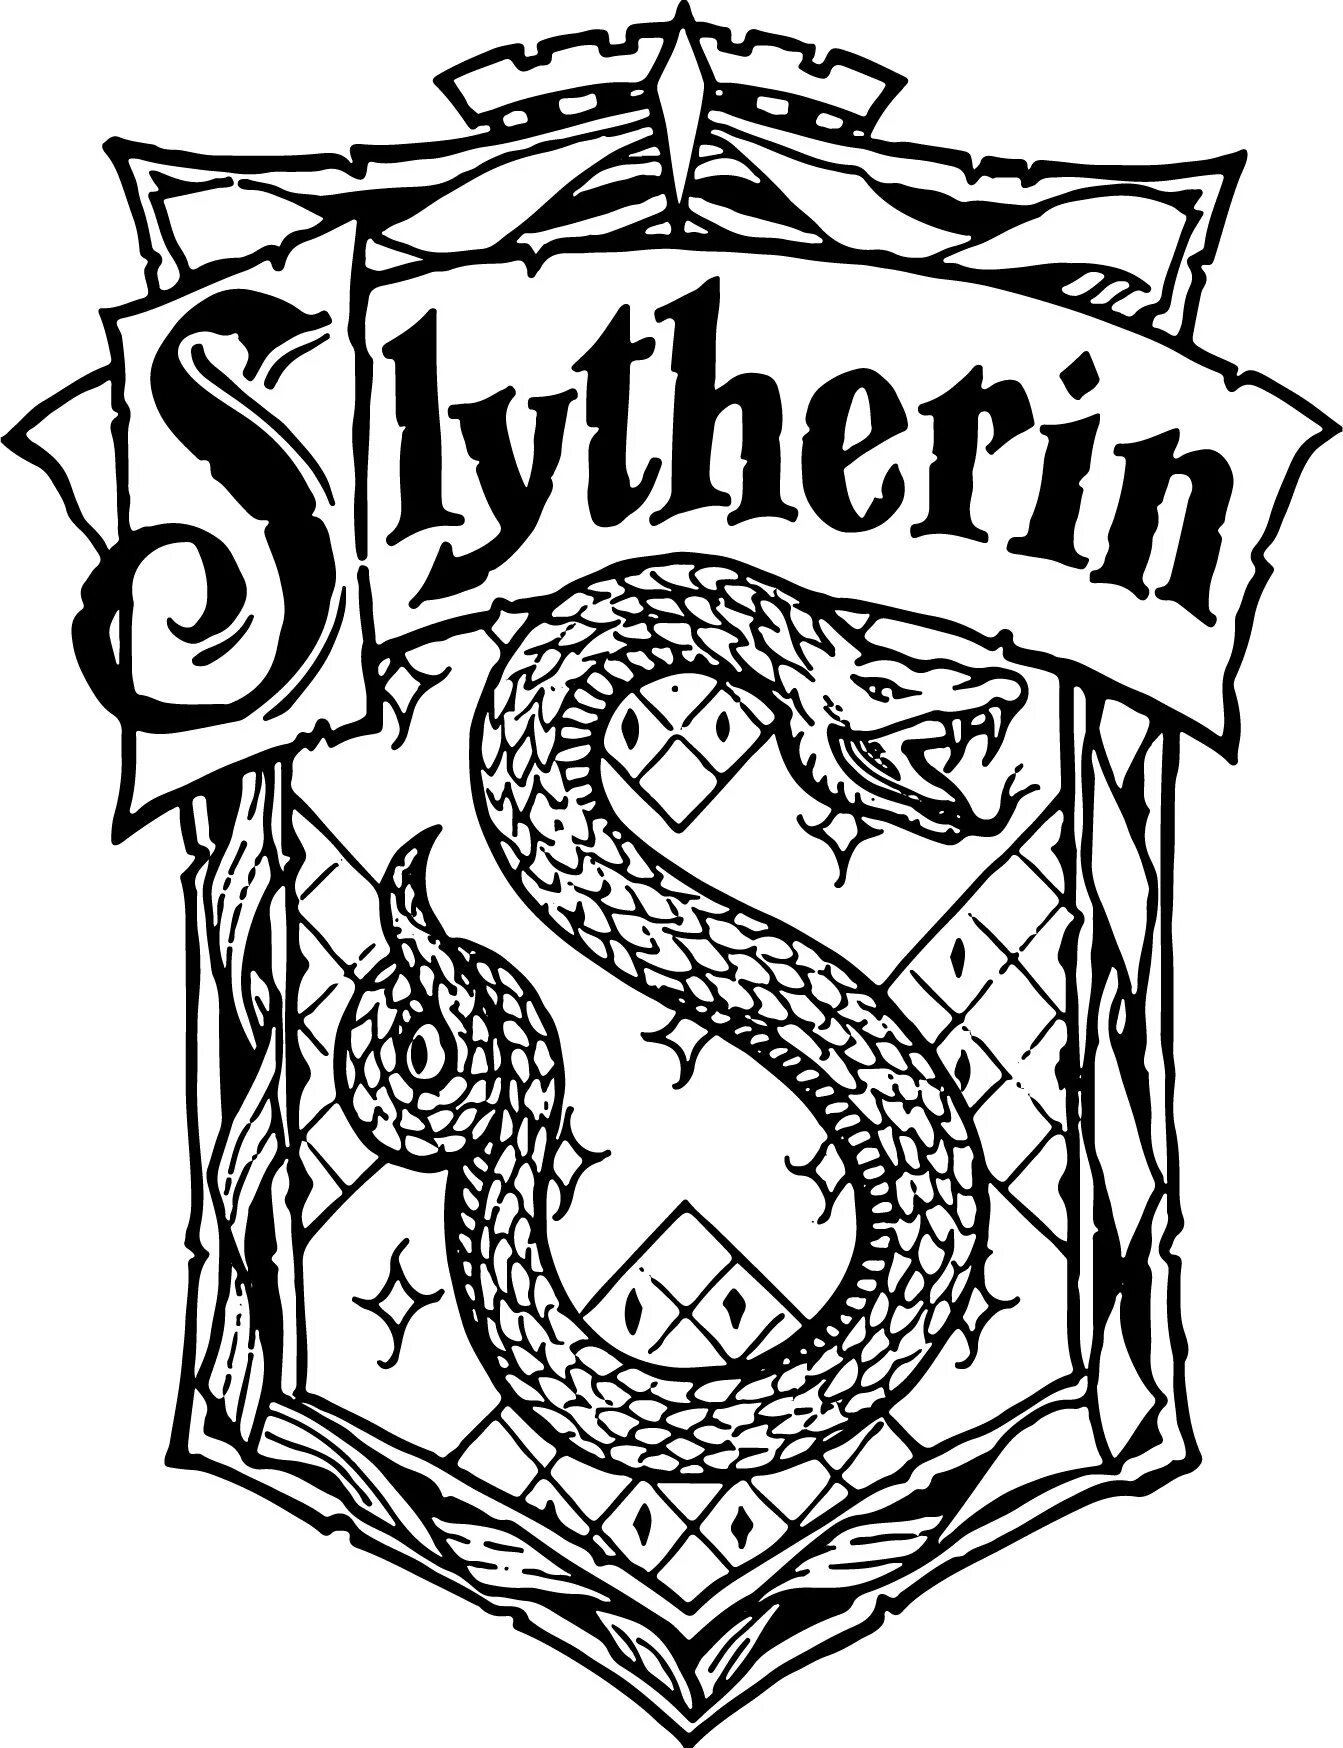 Slytherin coat of arms #15